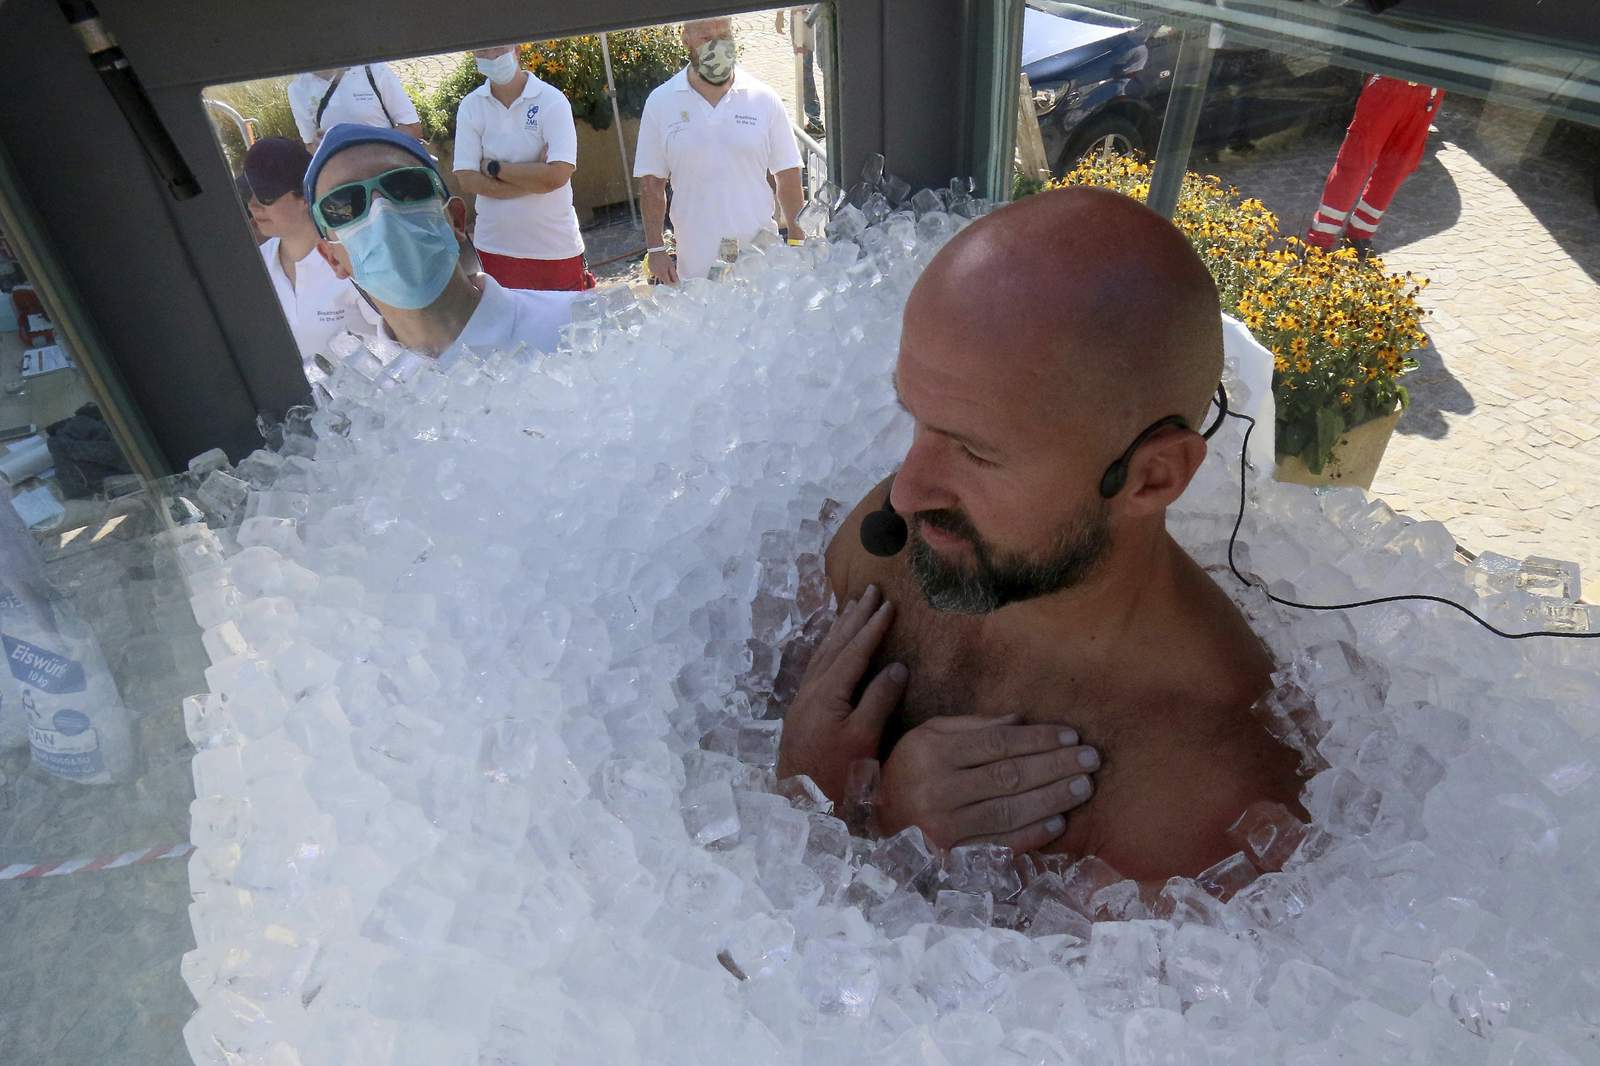 Austrian man spends 2.5 hours in box filled with ice cubes